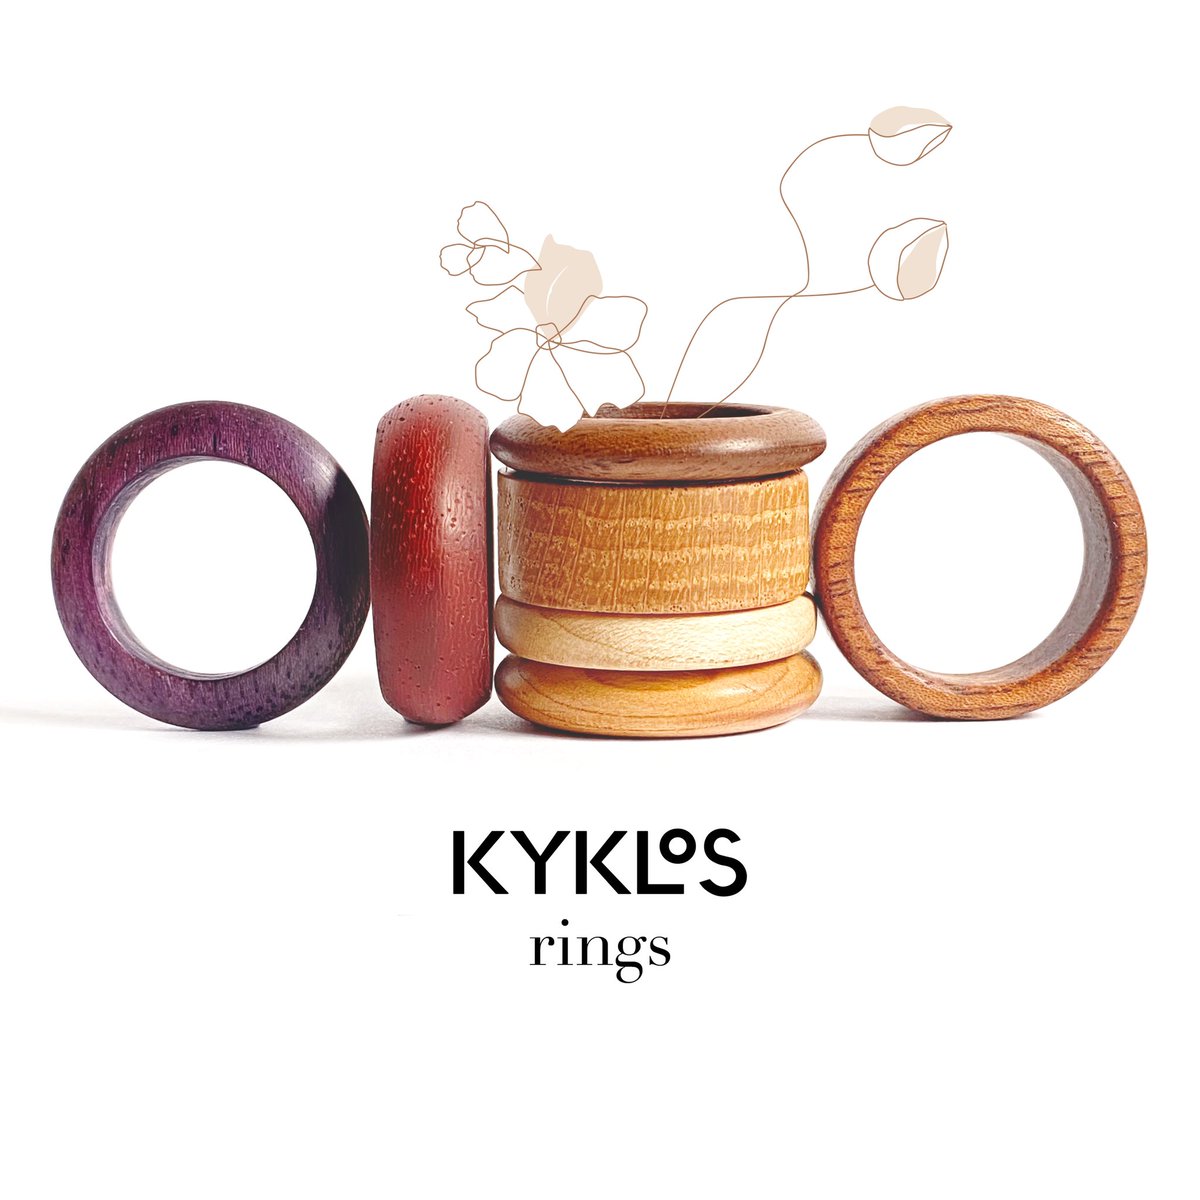 Looking for something unique? Check our wood rings etsy.com/shop/KyklosCre…
#woodring #woodenjewelry #woodaccessories #etsyshop #simpledesign #woodart